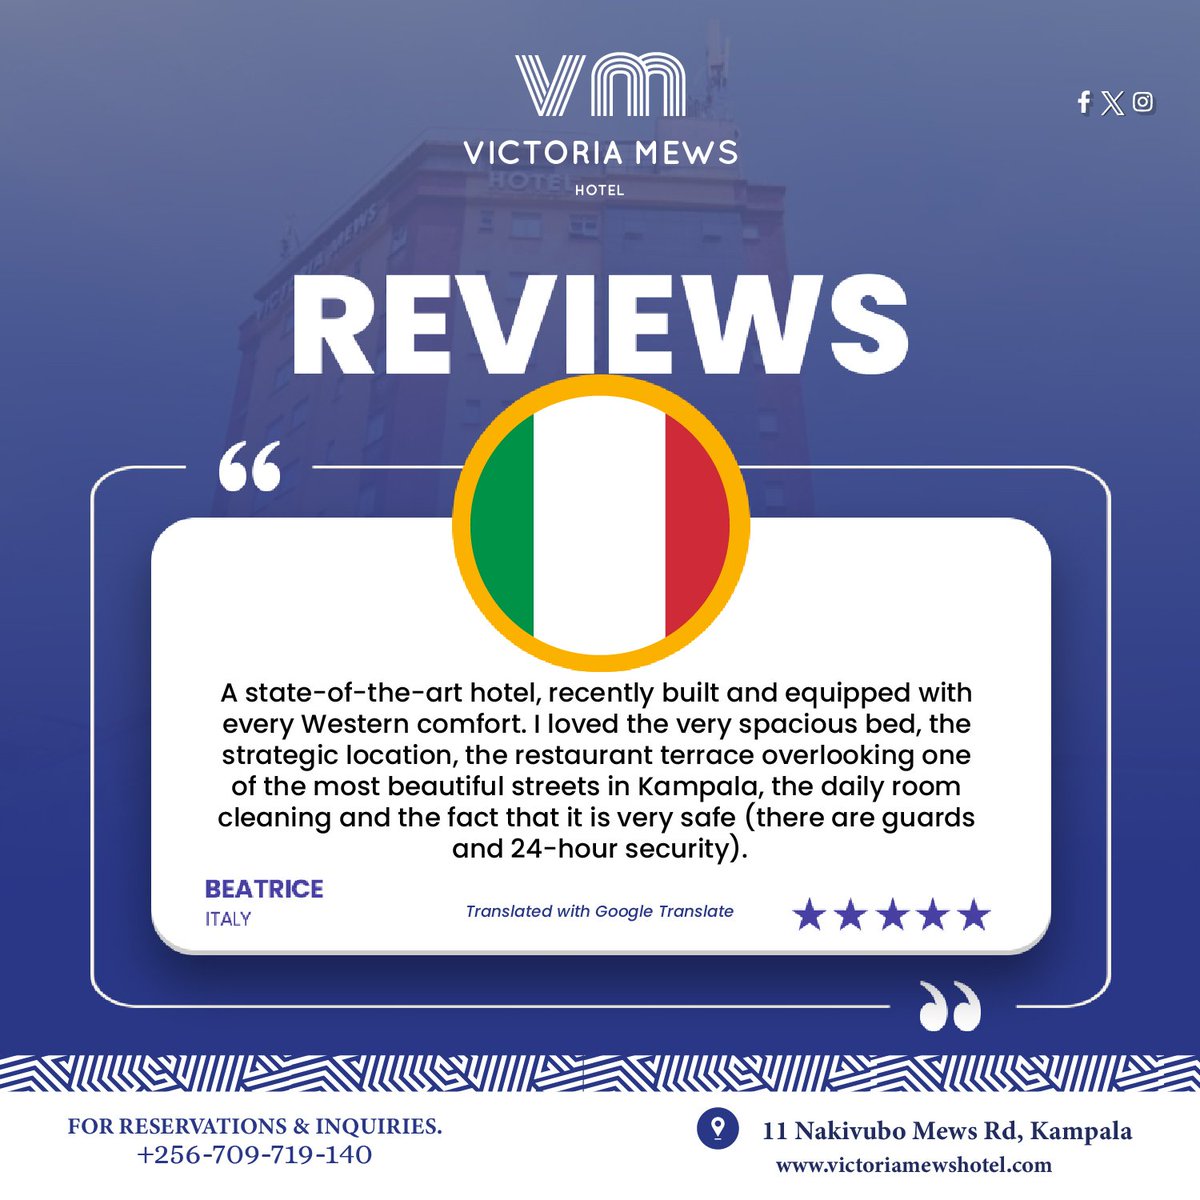 Victoria Mews Hotel: Where every stay exceeds expectations. Read our rave reviews and discover why guests can't stop praising our hospitality! 

#VictoriaMewsHotel #GuestReviews #ExceedingExpectations